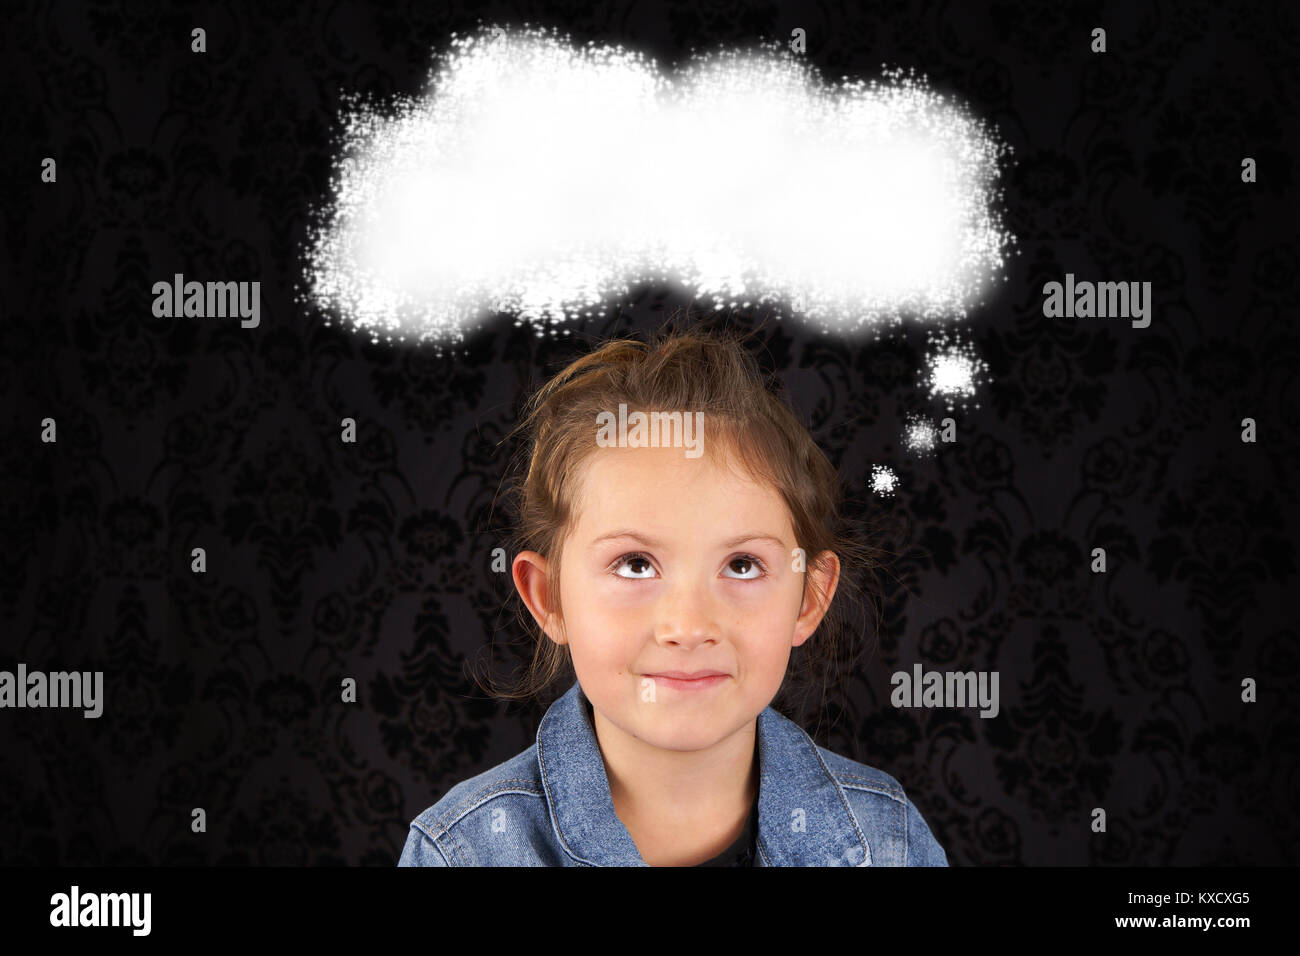 Little girl thinking looking up at thought bubble Stock Photo